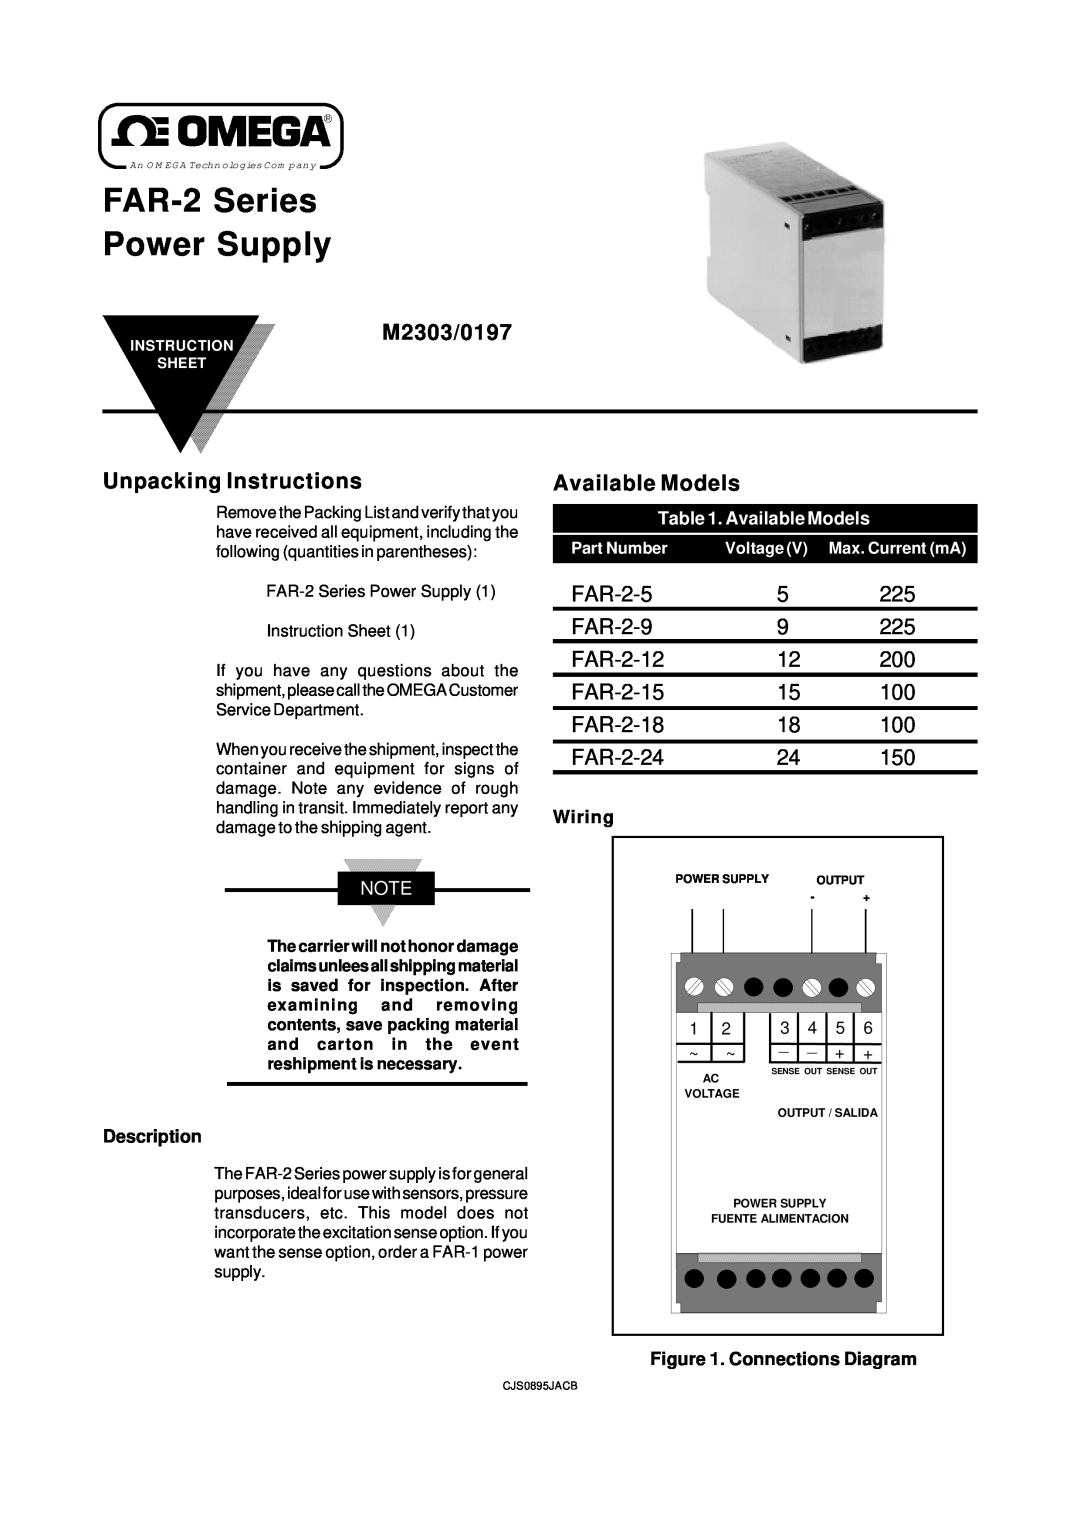 Omega instruction sheet FAR-2 Series Power Supply, M2303/0197, Unpacking Instructions, Available Models 